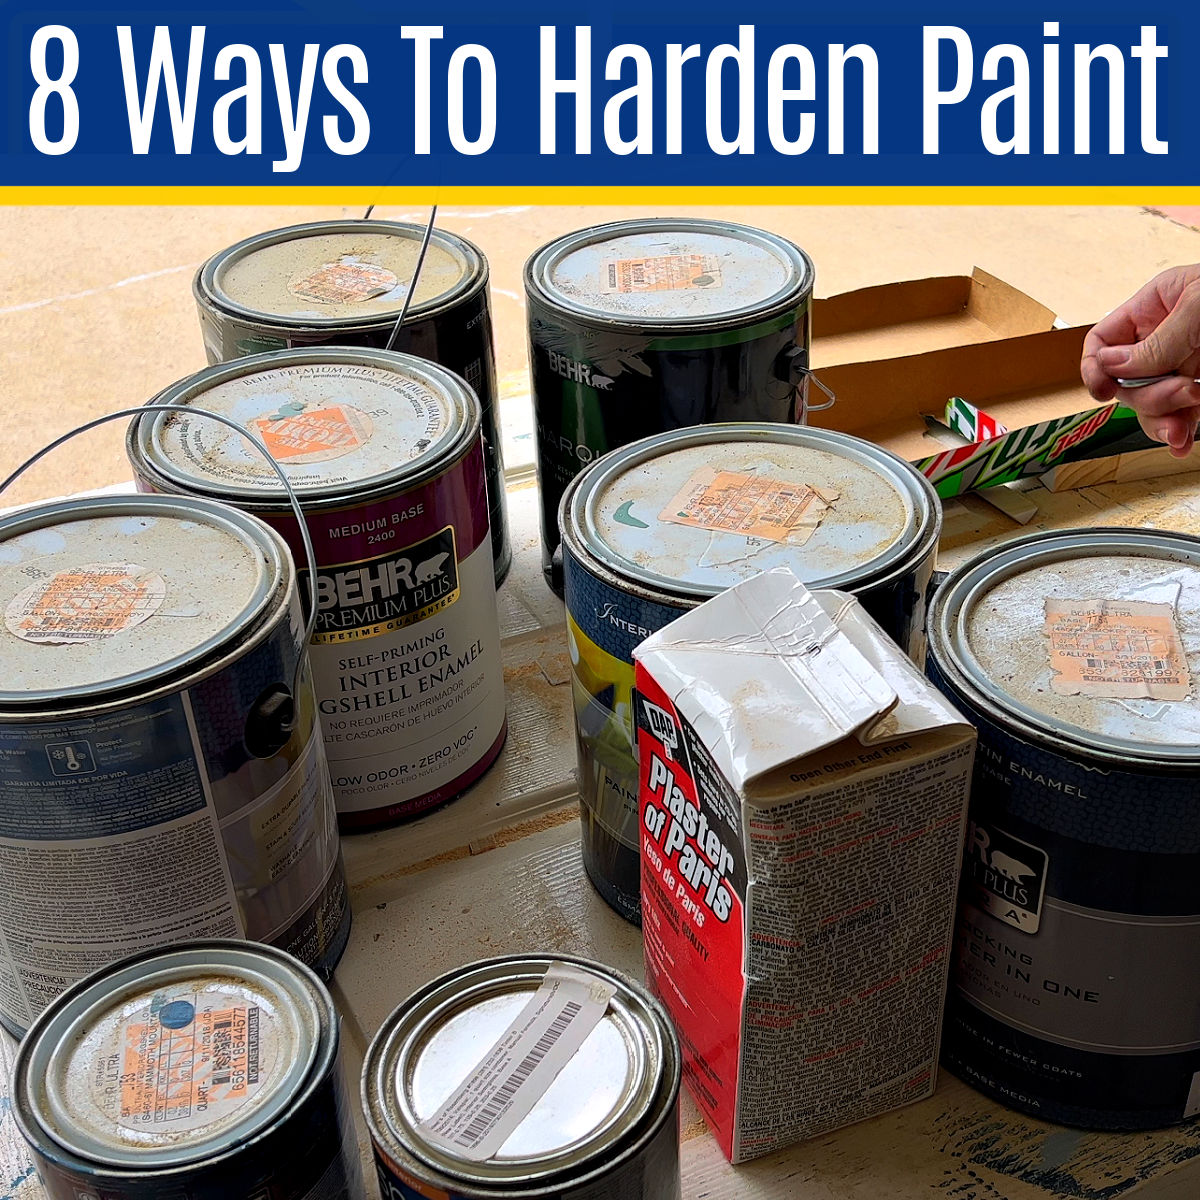 How To Dispose Of Paint The Right Way - DIY Painting Tips